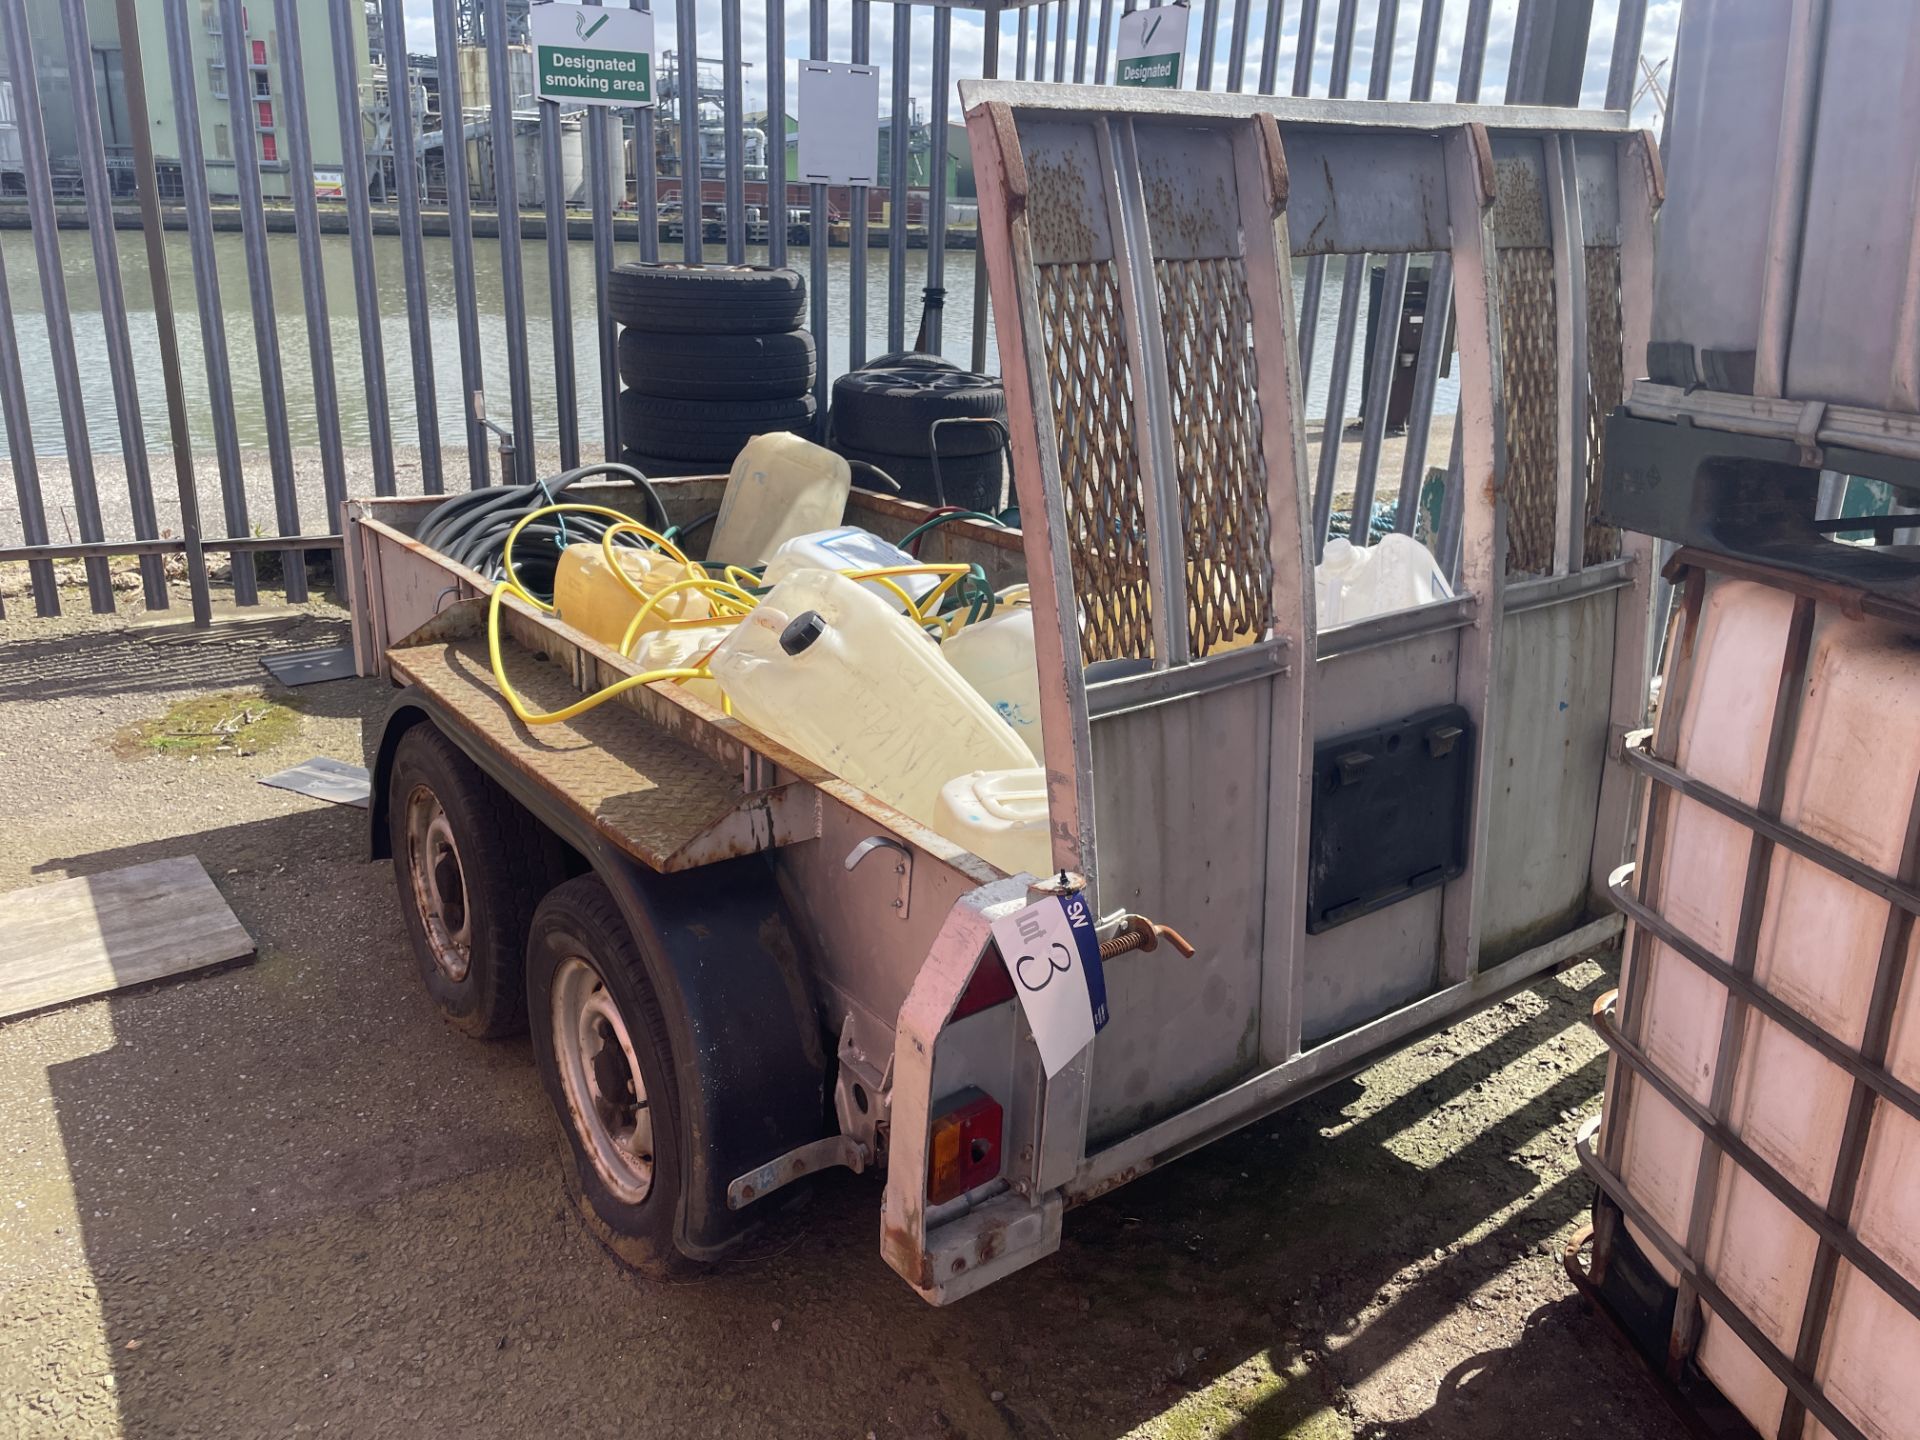 Ifor Williams PD84GTA-165 Twin Axle Plant Trailer, serial no. 182397, 2548kg gross weight, with